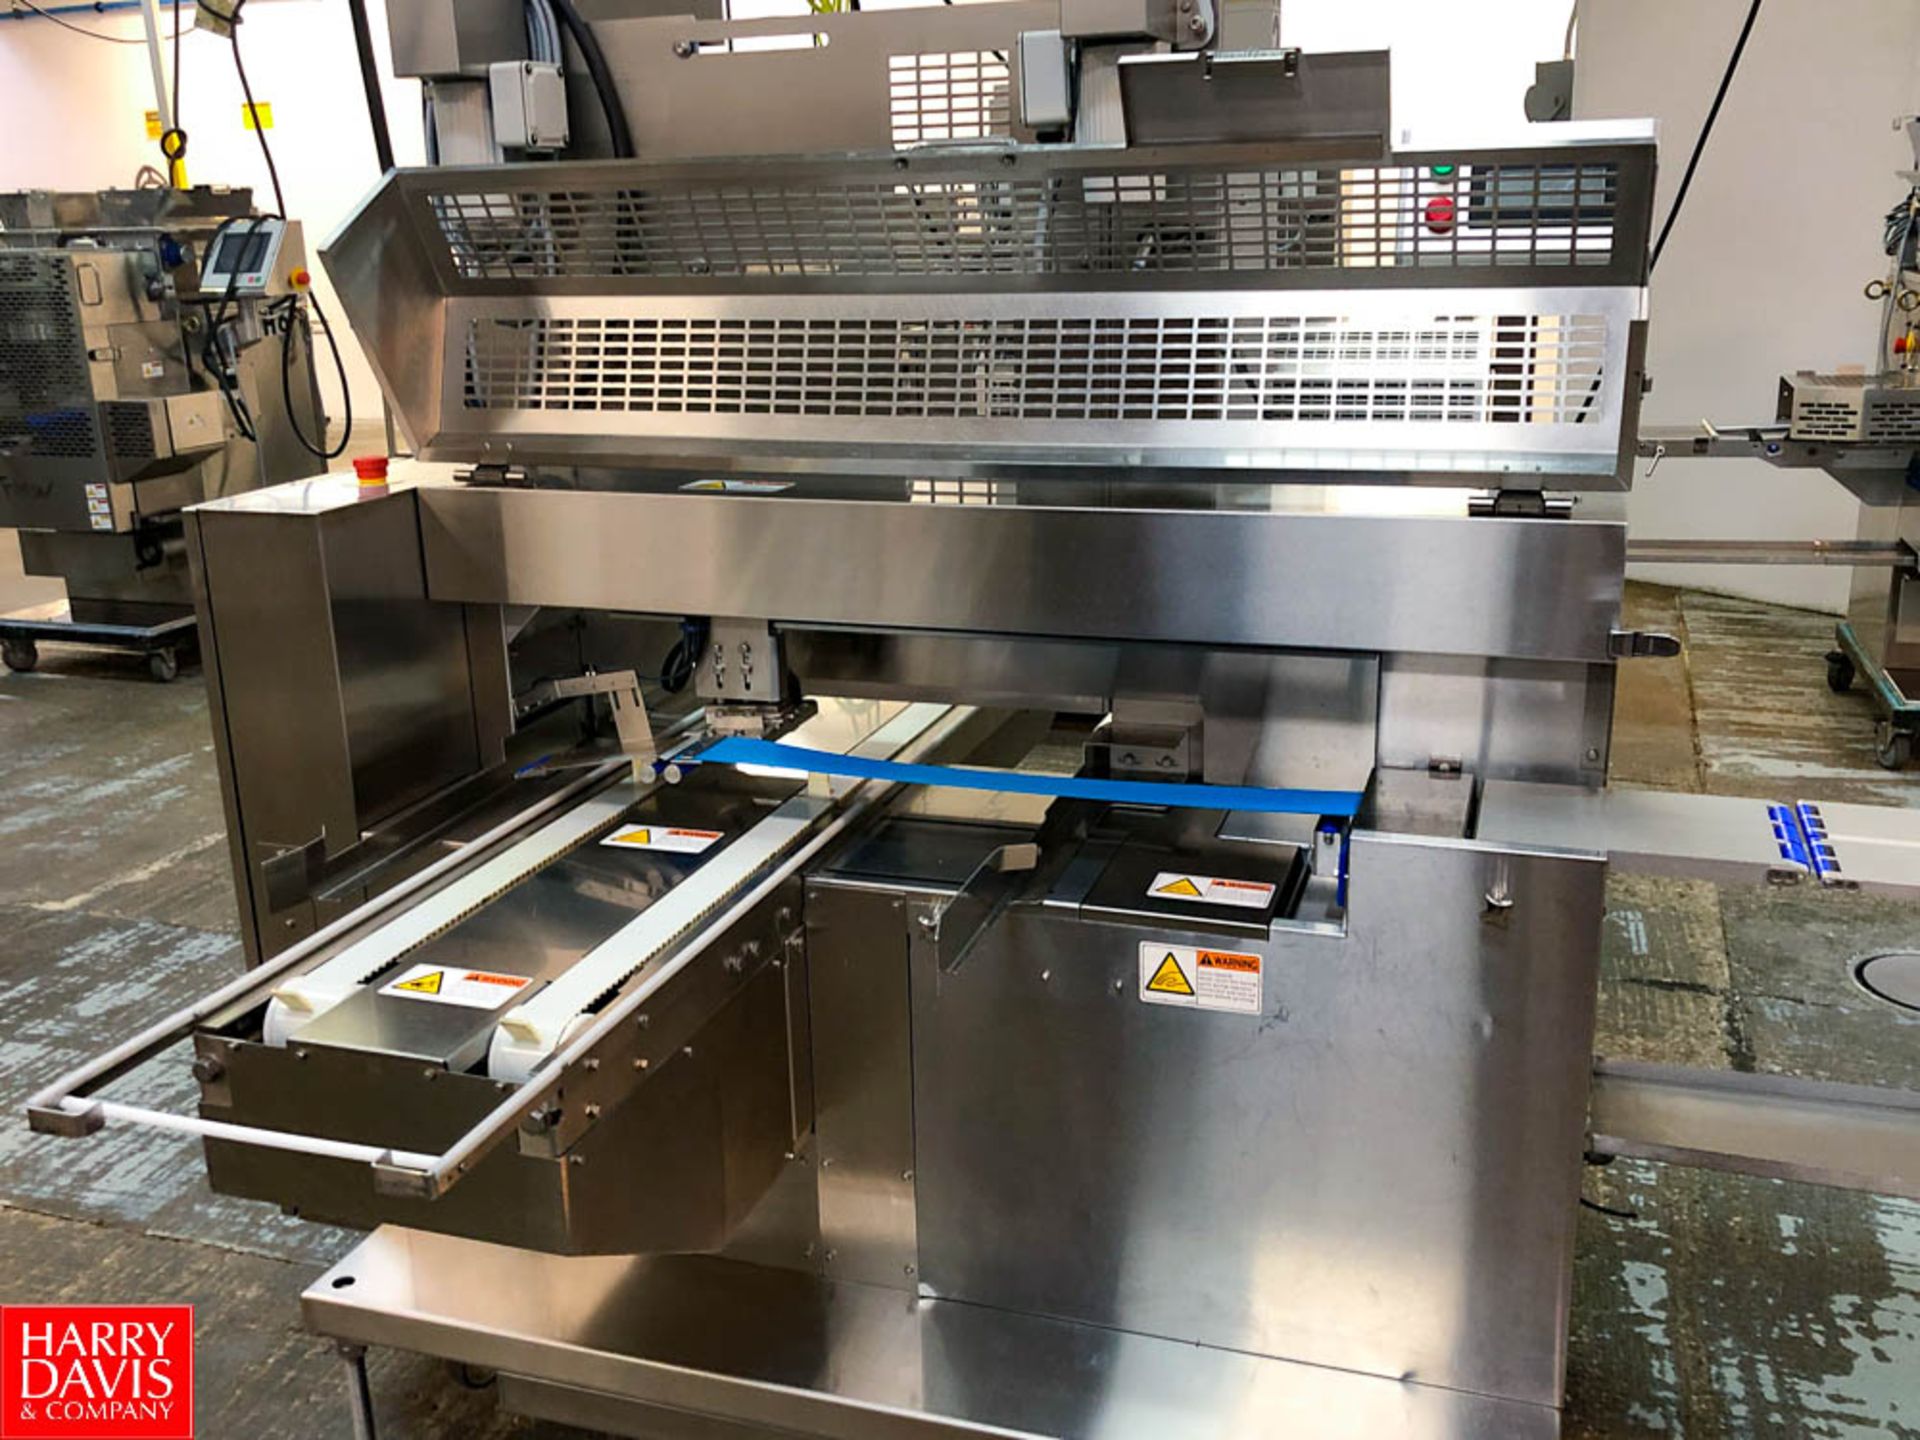 2019 Rheon Set Panner KP302; Tray Size: 660 mm, Up to 60 pcs/min, S/N: 00232 With Belting Rigging - Image 2 of 5